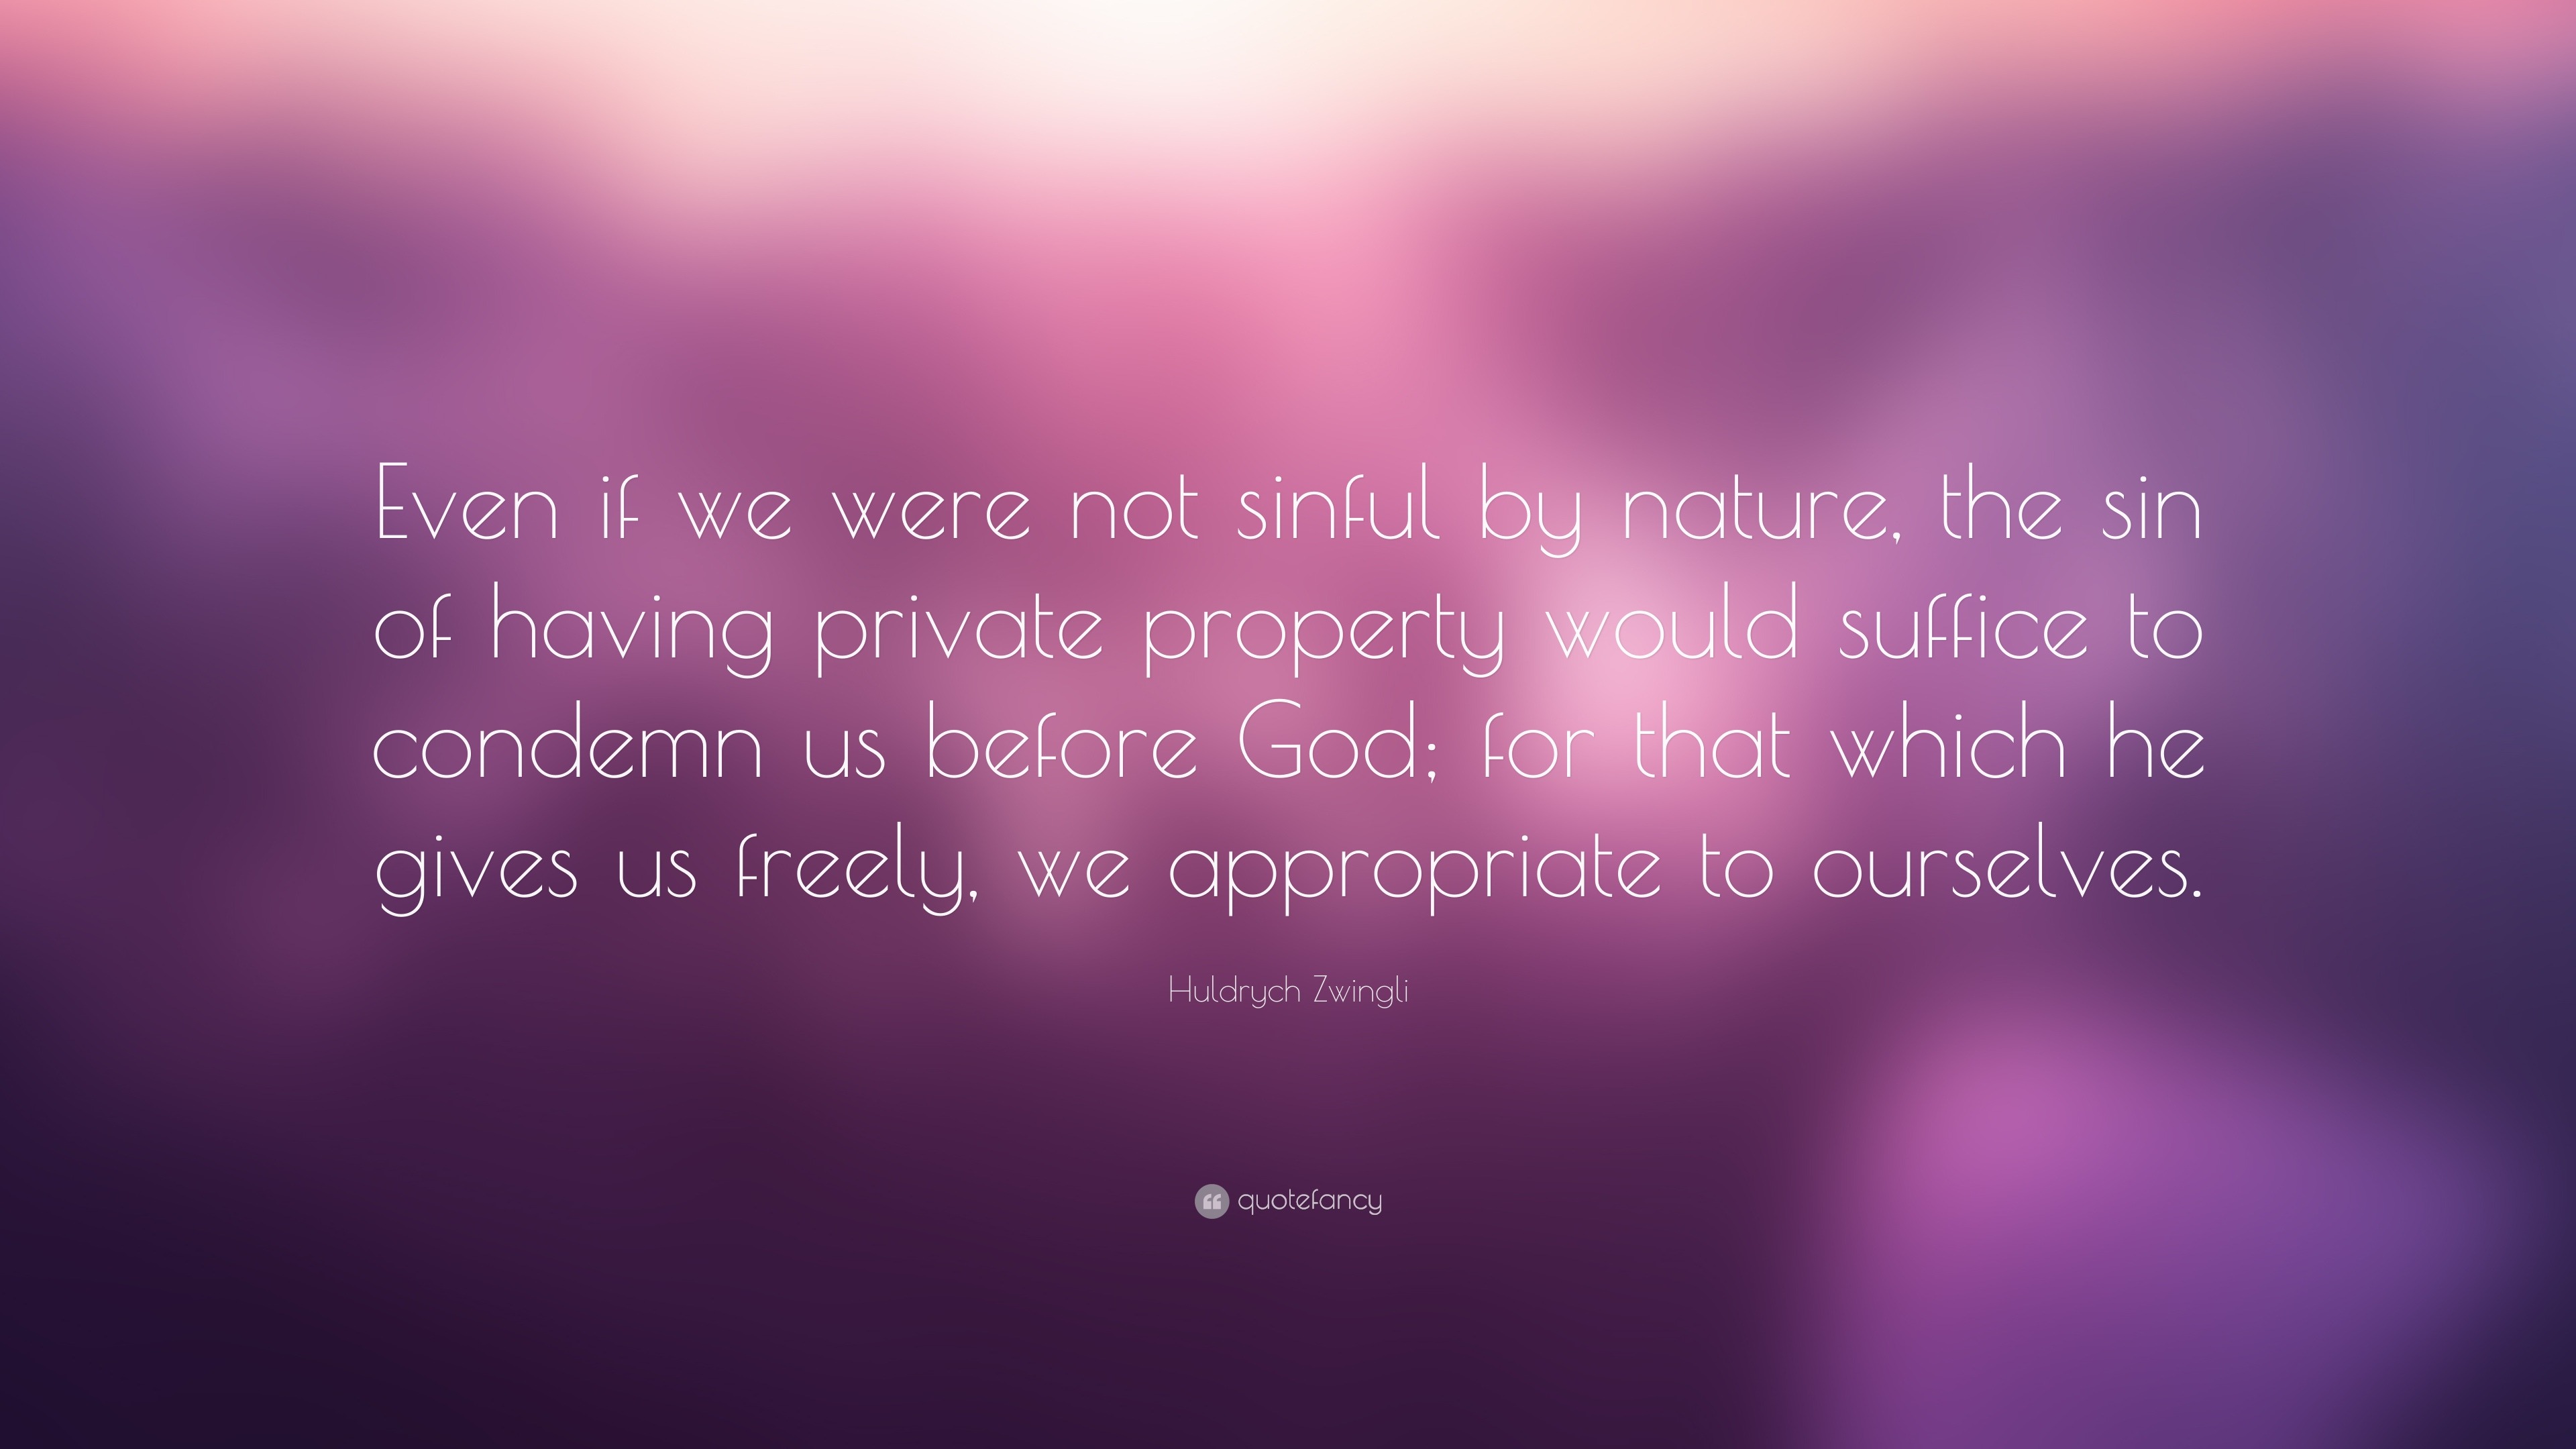 Huldrych Zwingli Quote: “Even if we were not sinful by nature, the sin ...